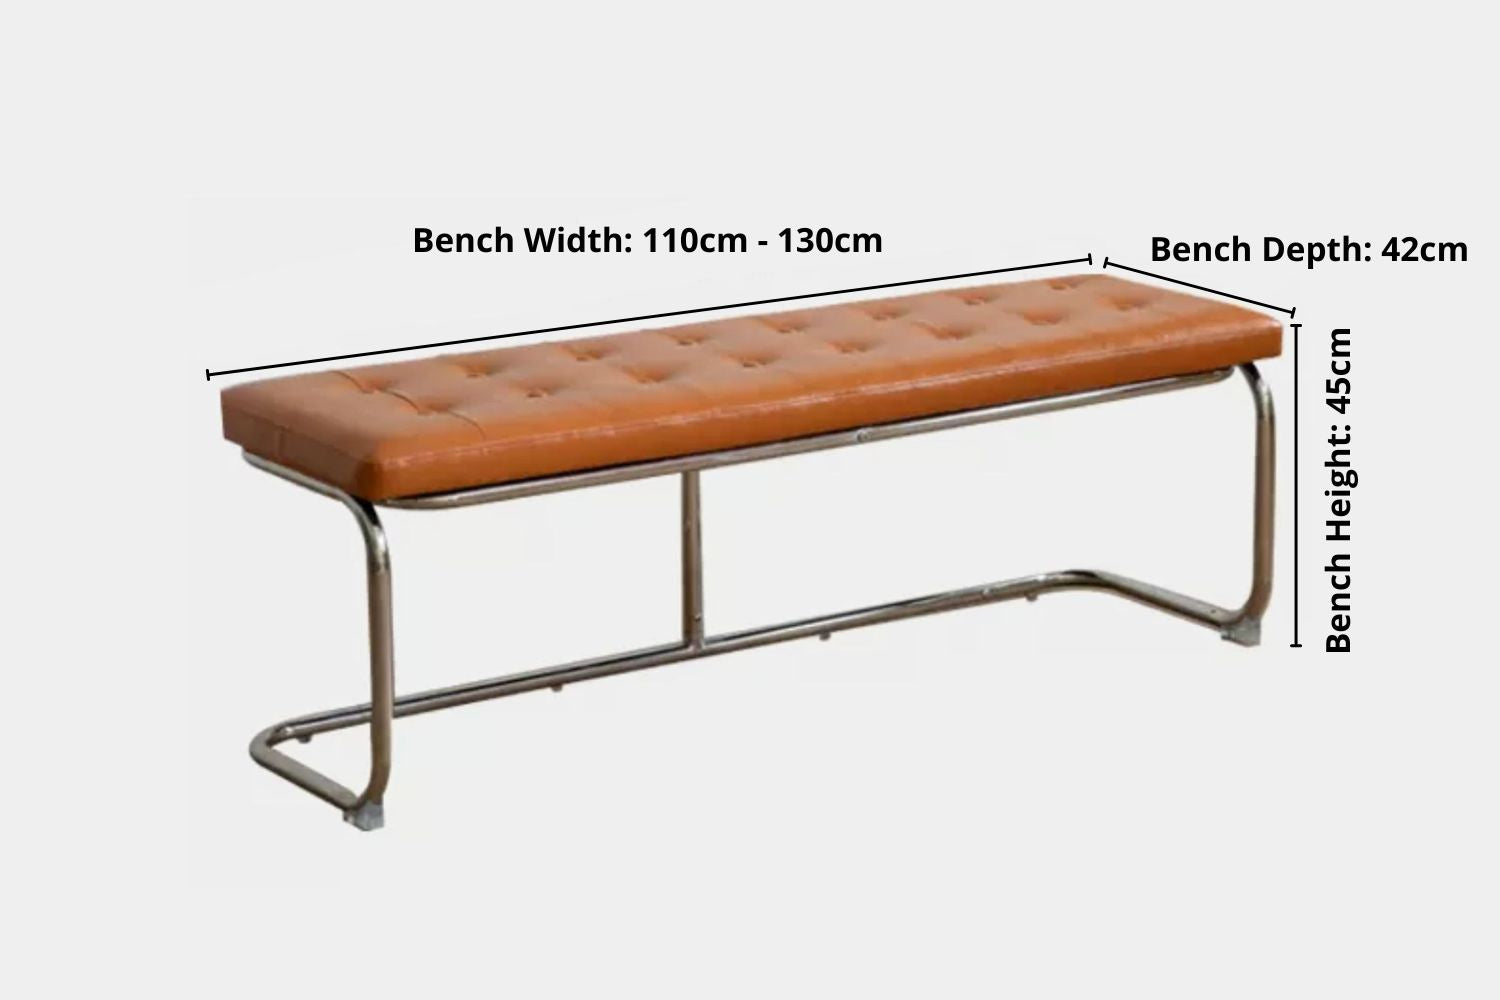 Key product dimensions such as depth, width and height for Theo Stainless Steel Bench